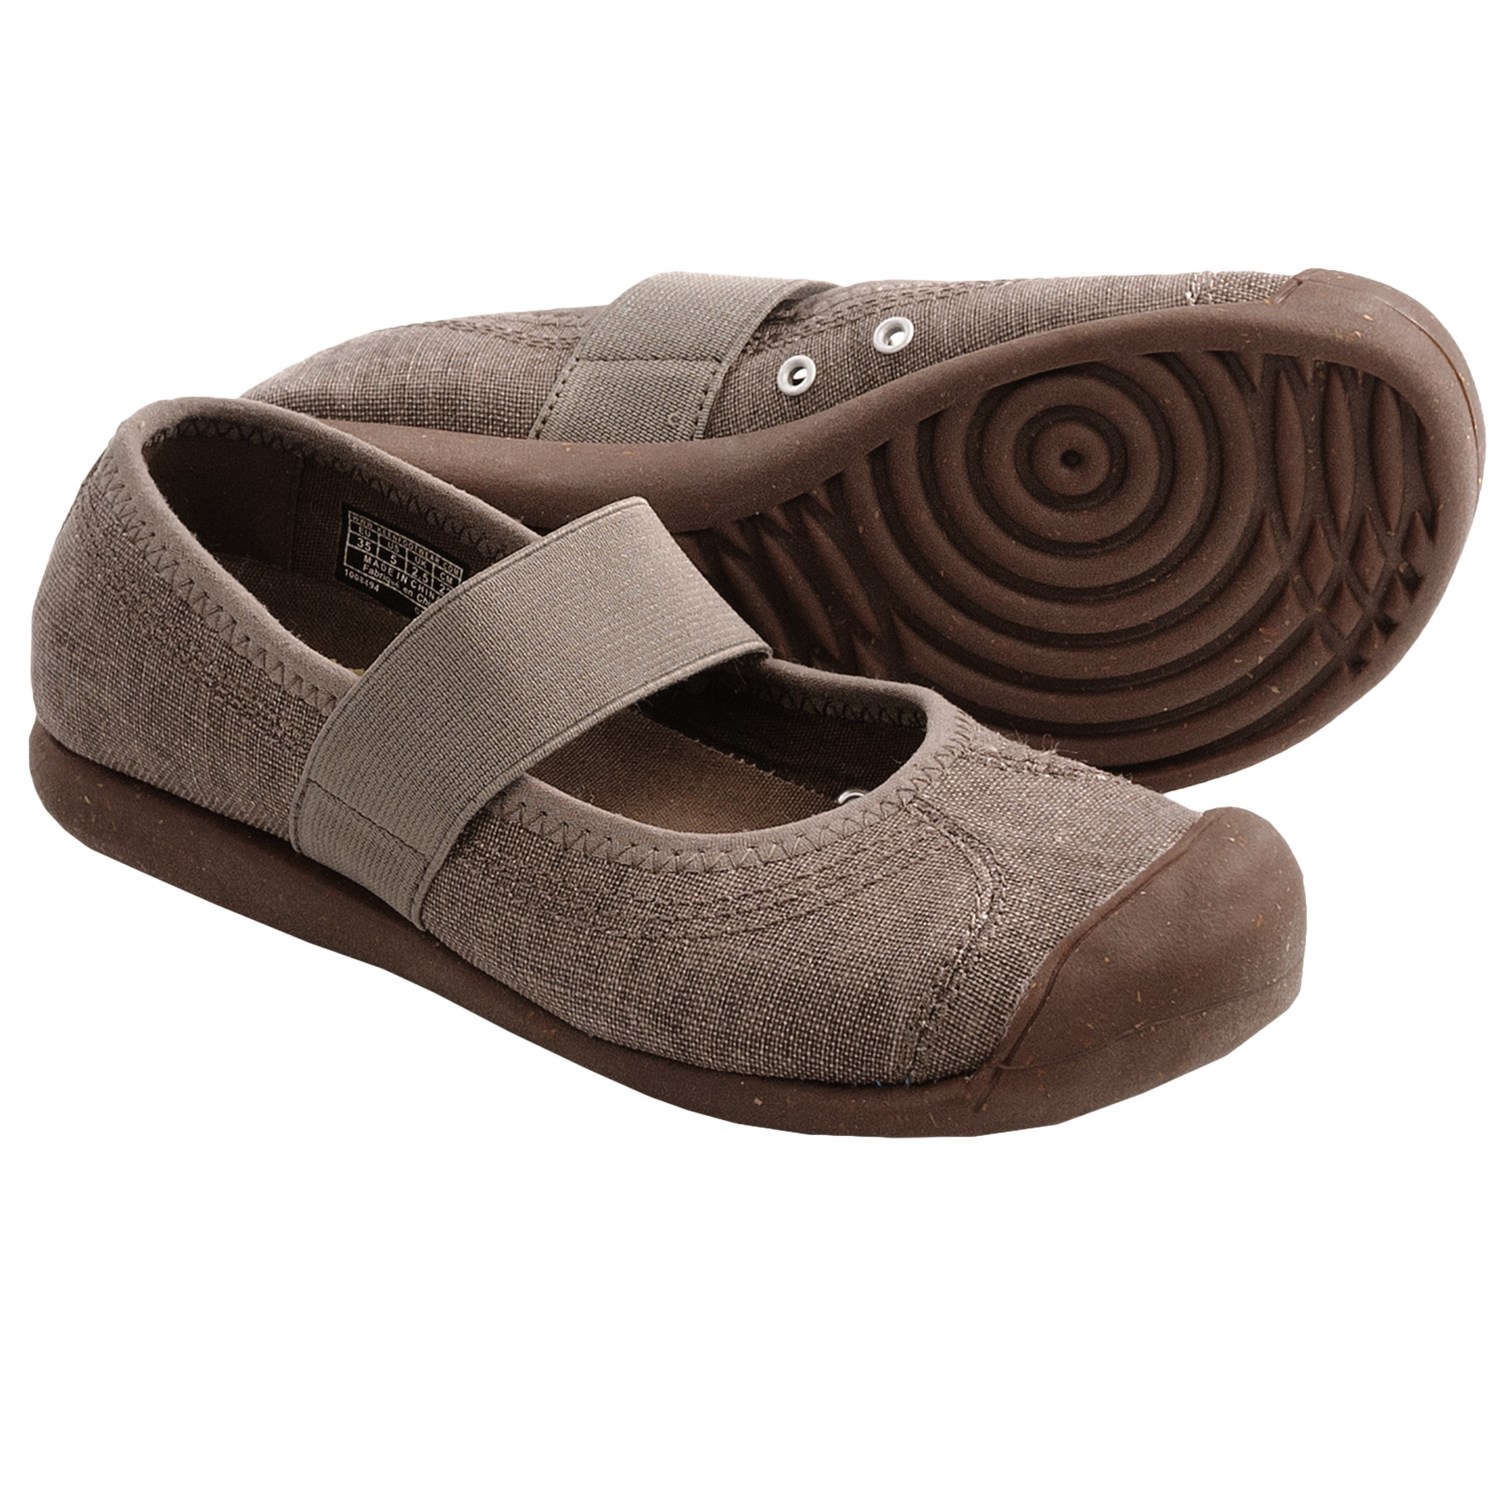 Keen Sienna Mary Jane Shoes - Canvas (For Women) in Dark Earth